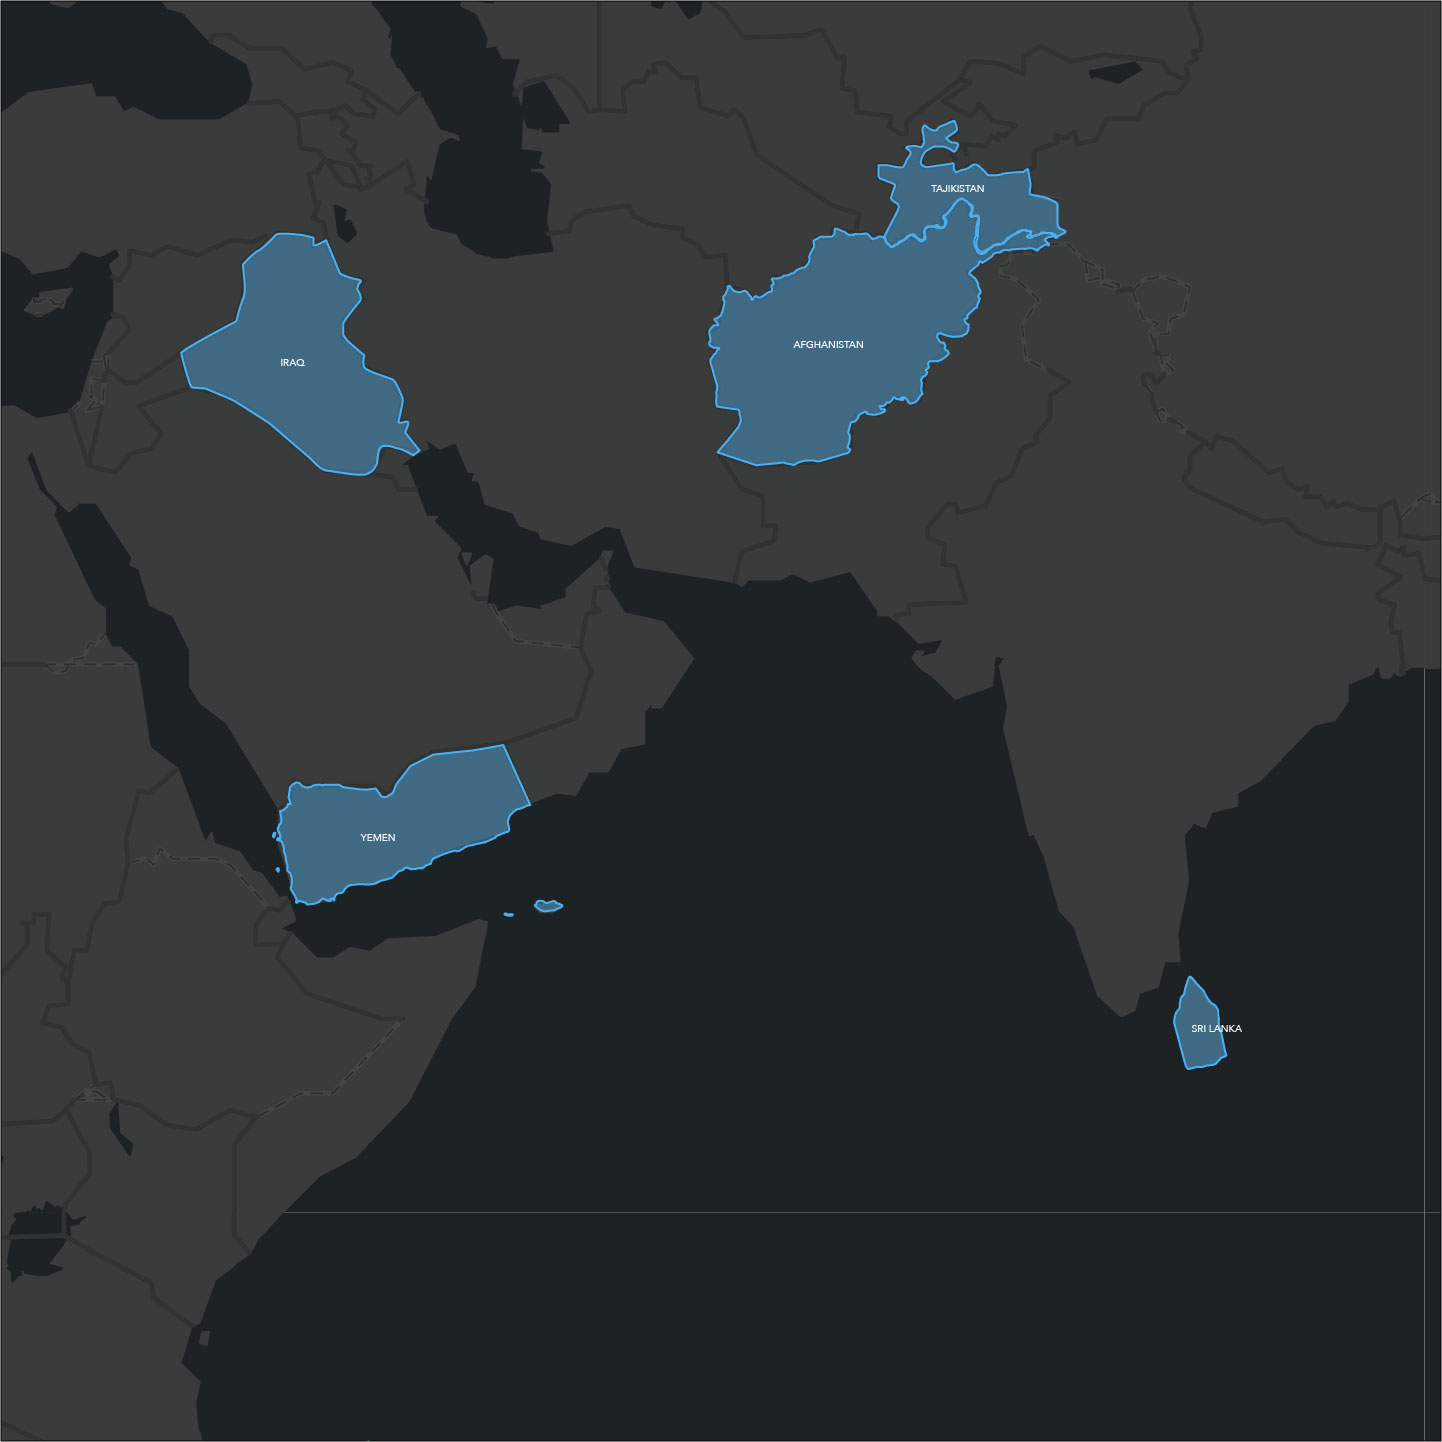 Map of the Middle East and West Asia with qualified countries highlighted in blue